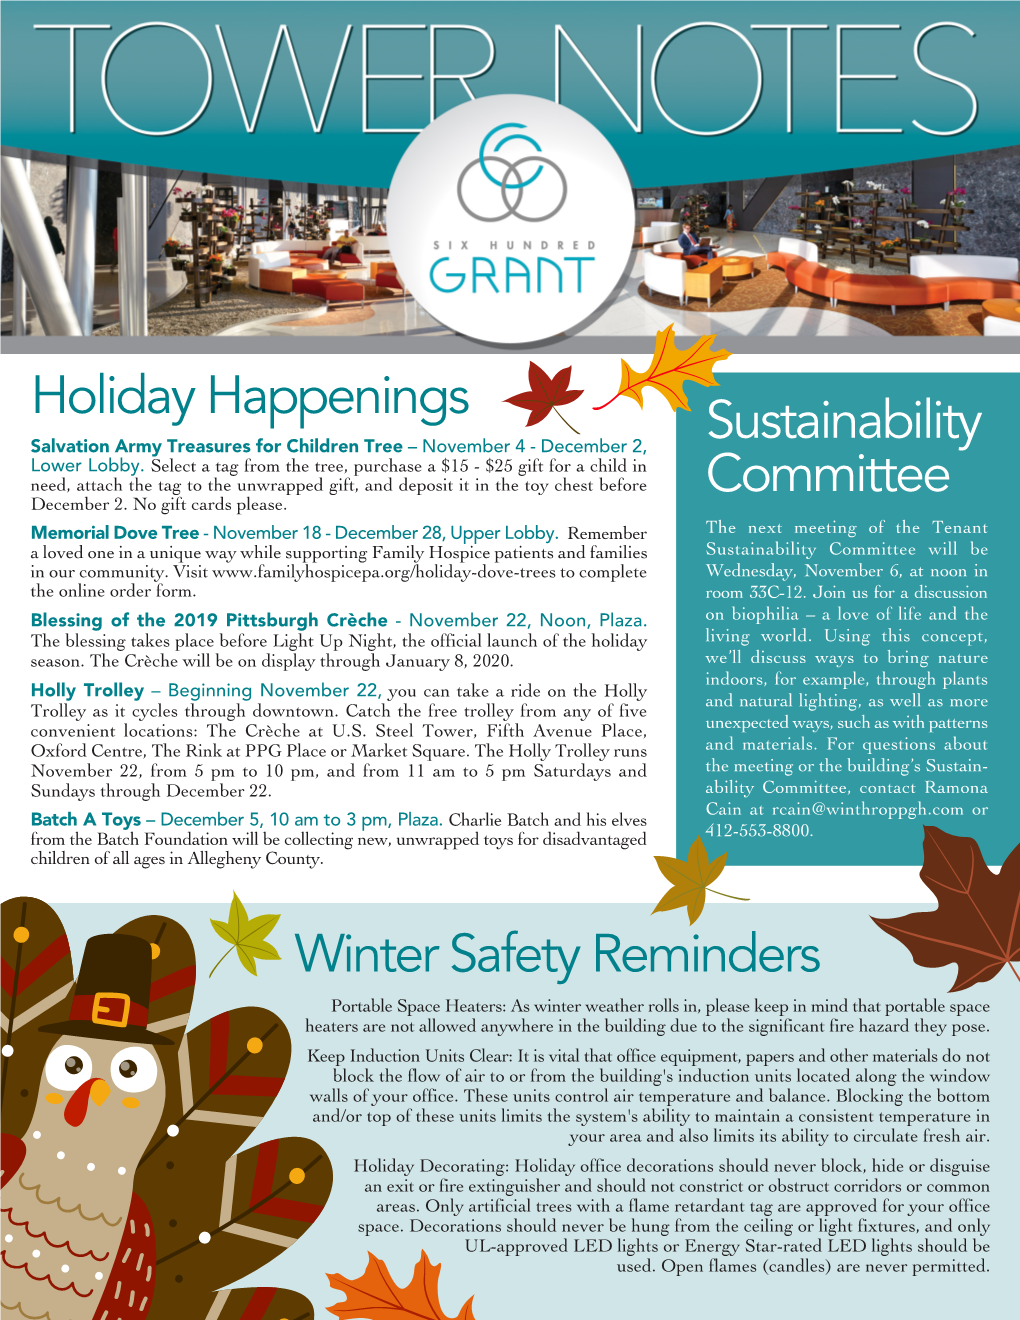 Sustainability Committee Holiday Happenings Winter Safety Reminders